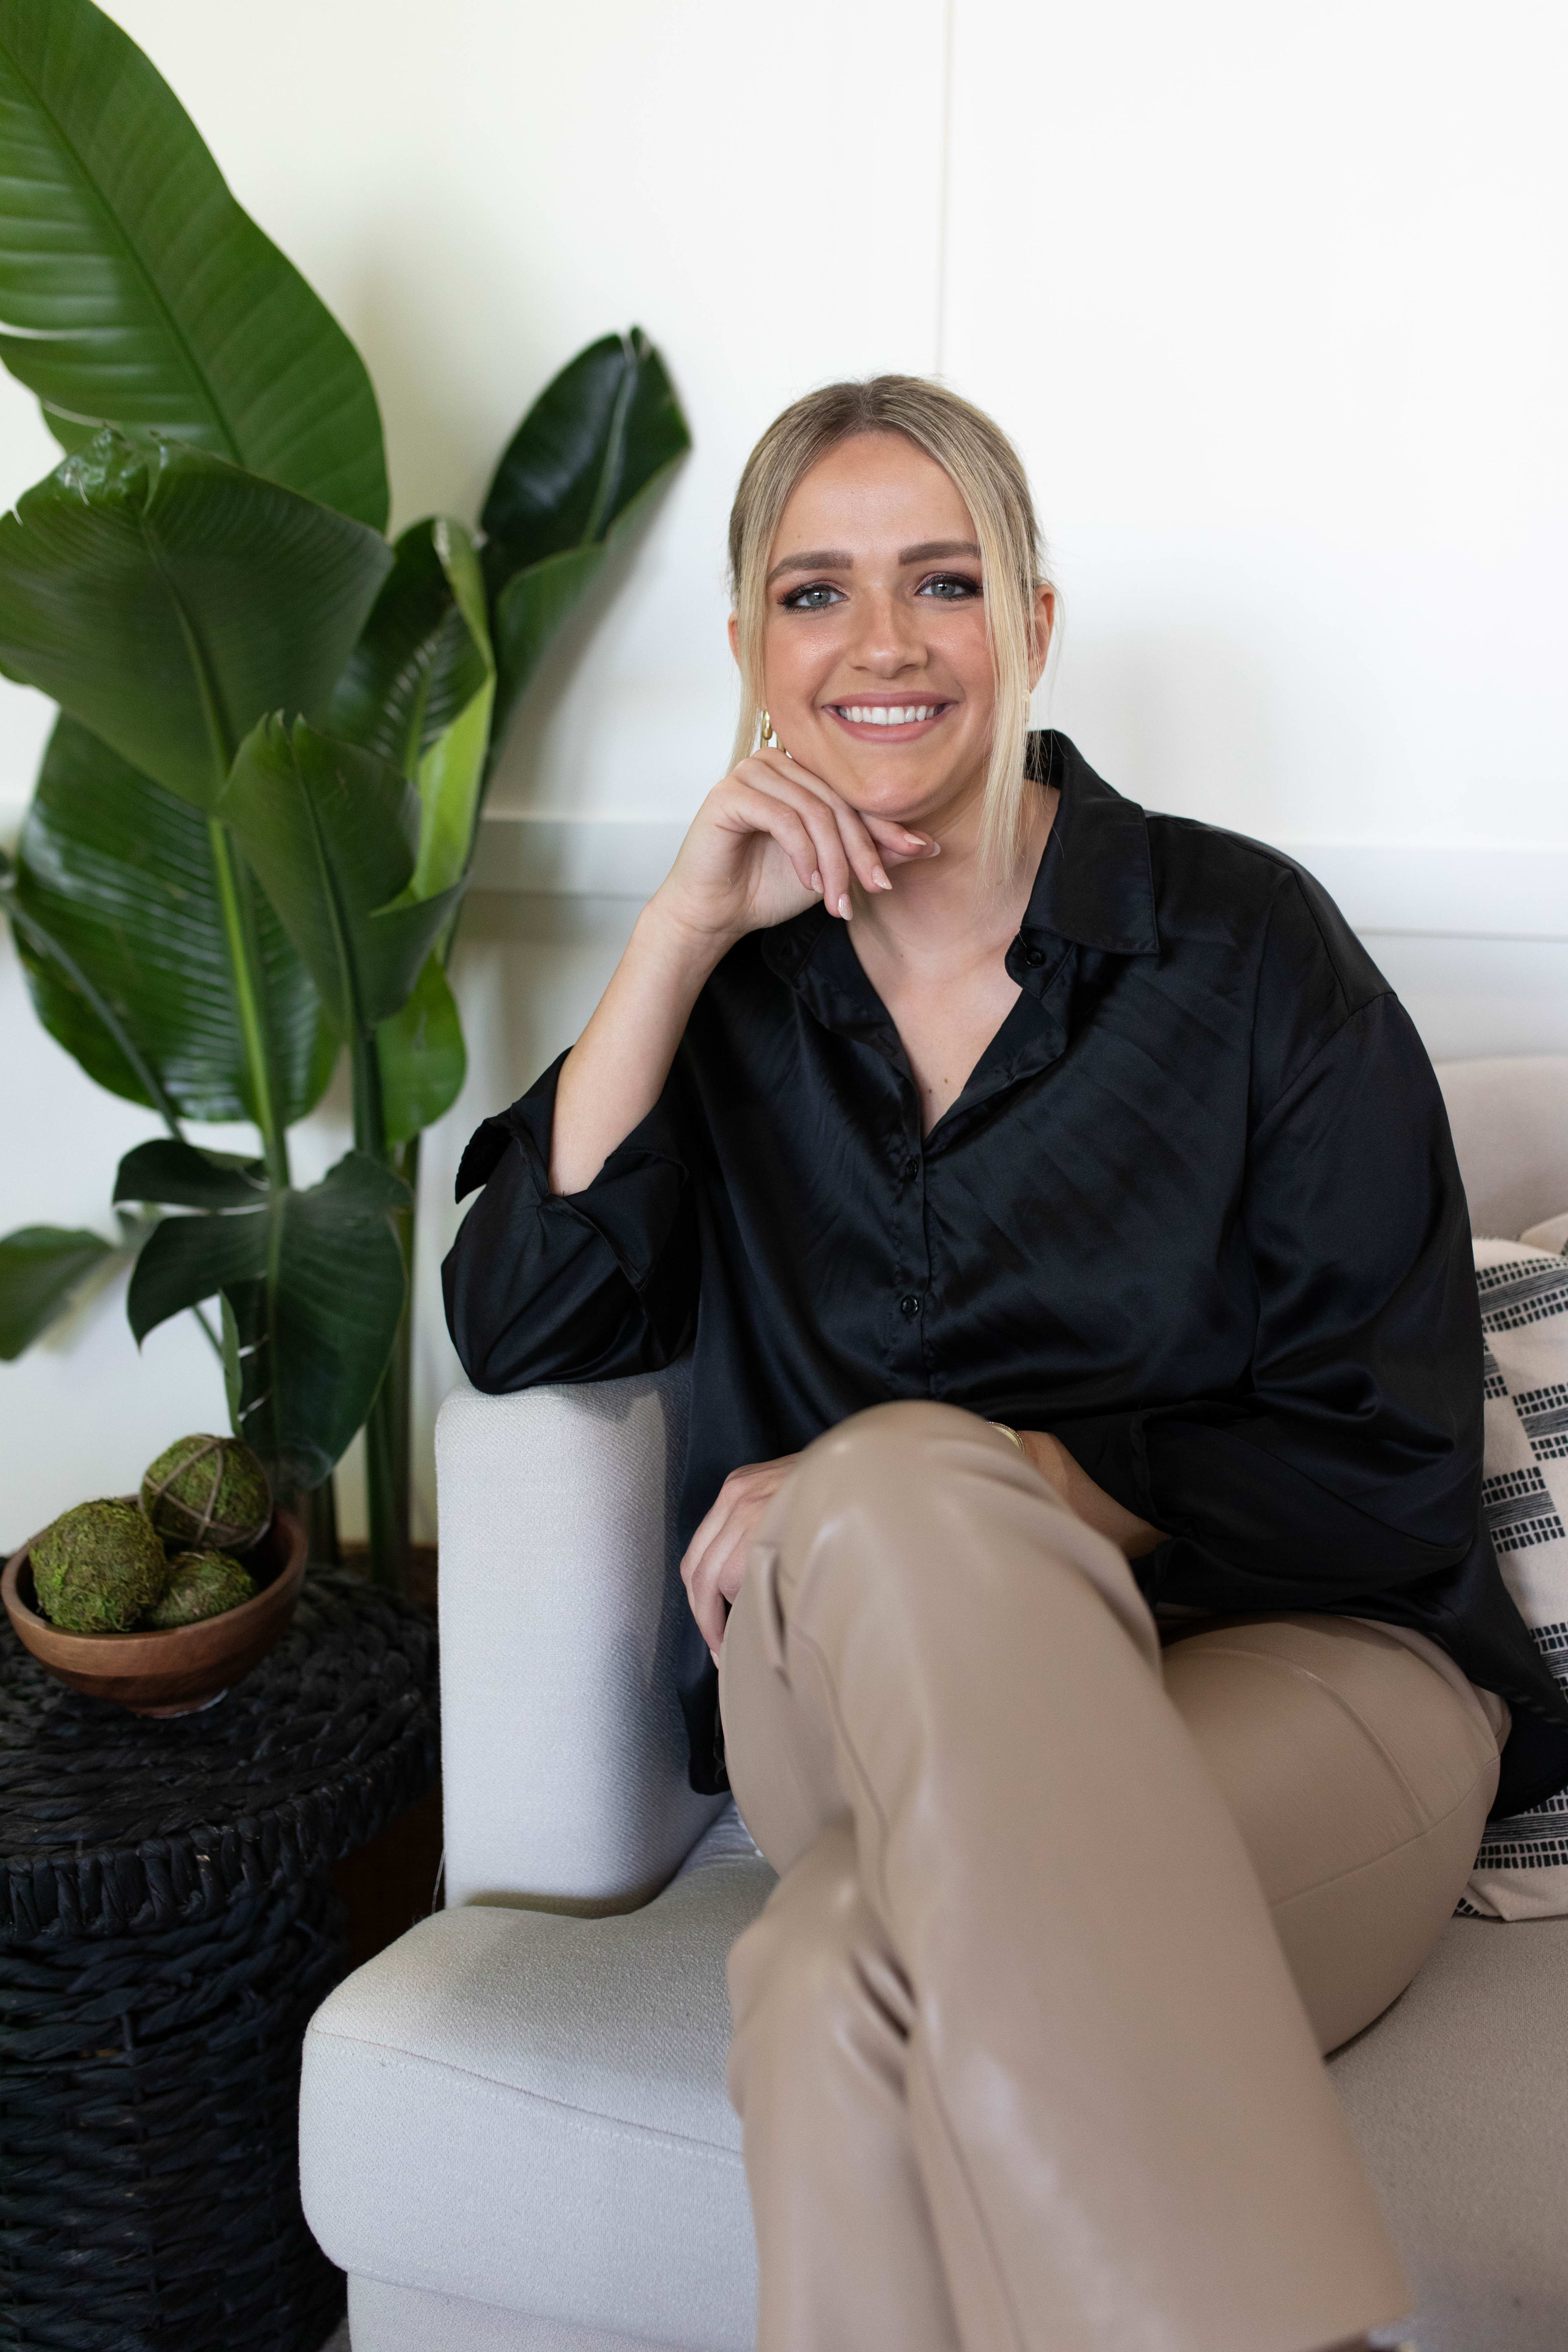 A woman posing for a portrait on a beige couch next to a potted green plant.